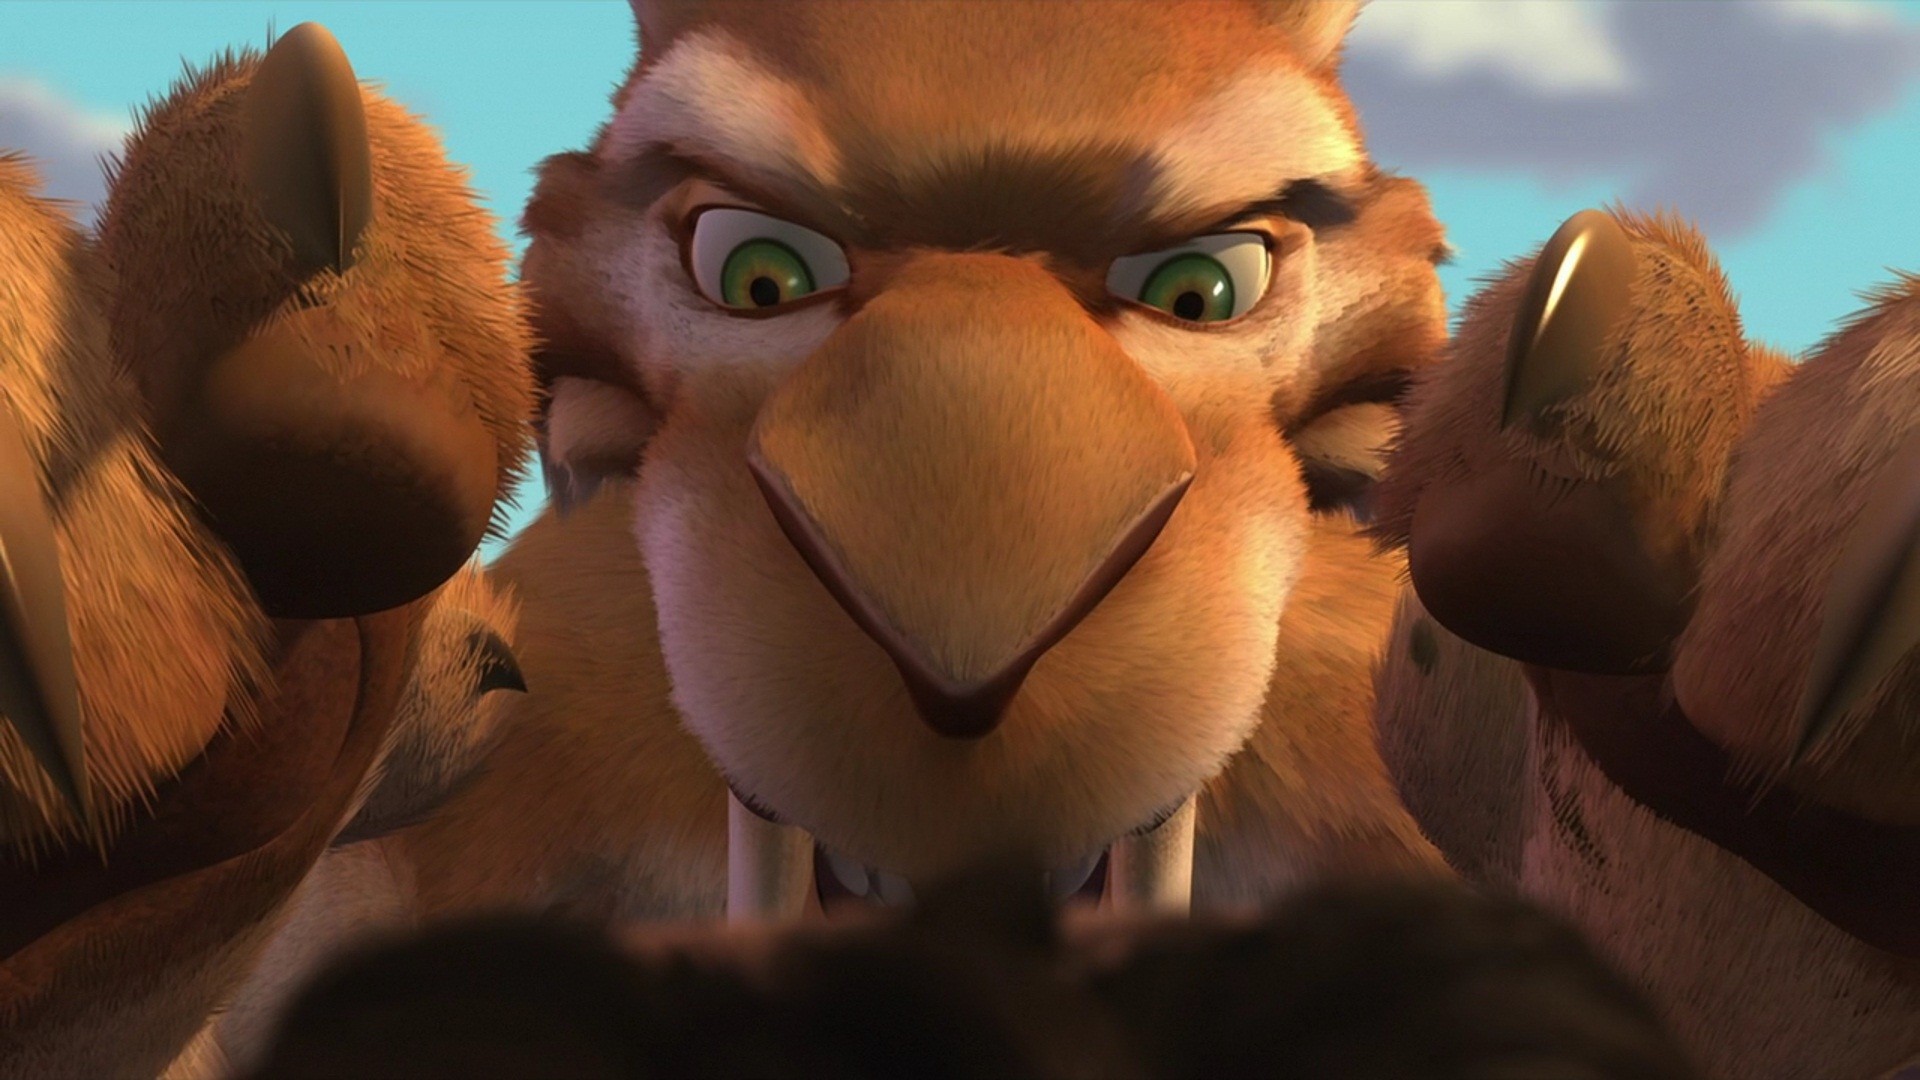 Movie Ice Age HD Wallpaper | Background Image